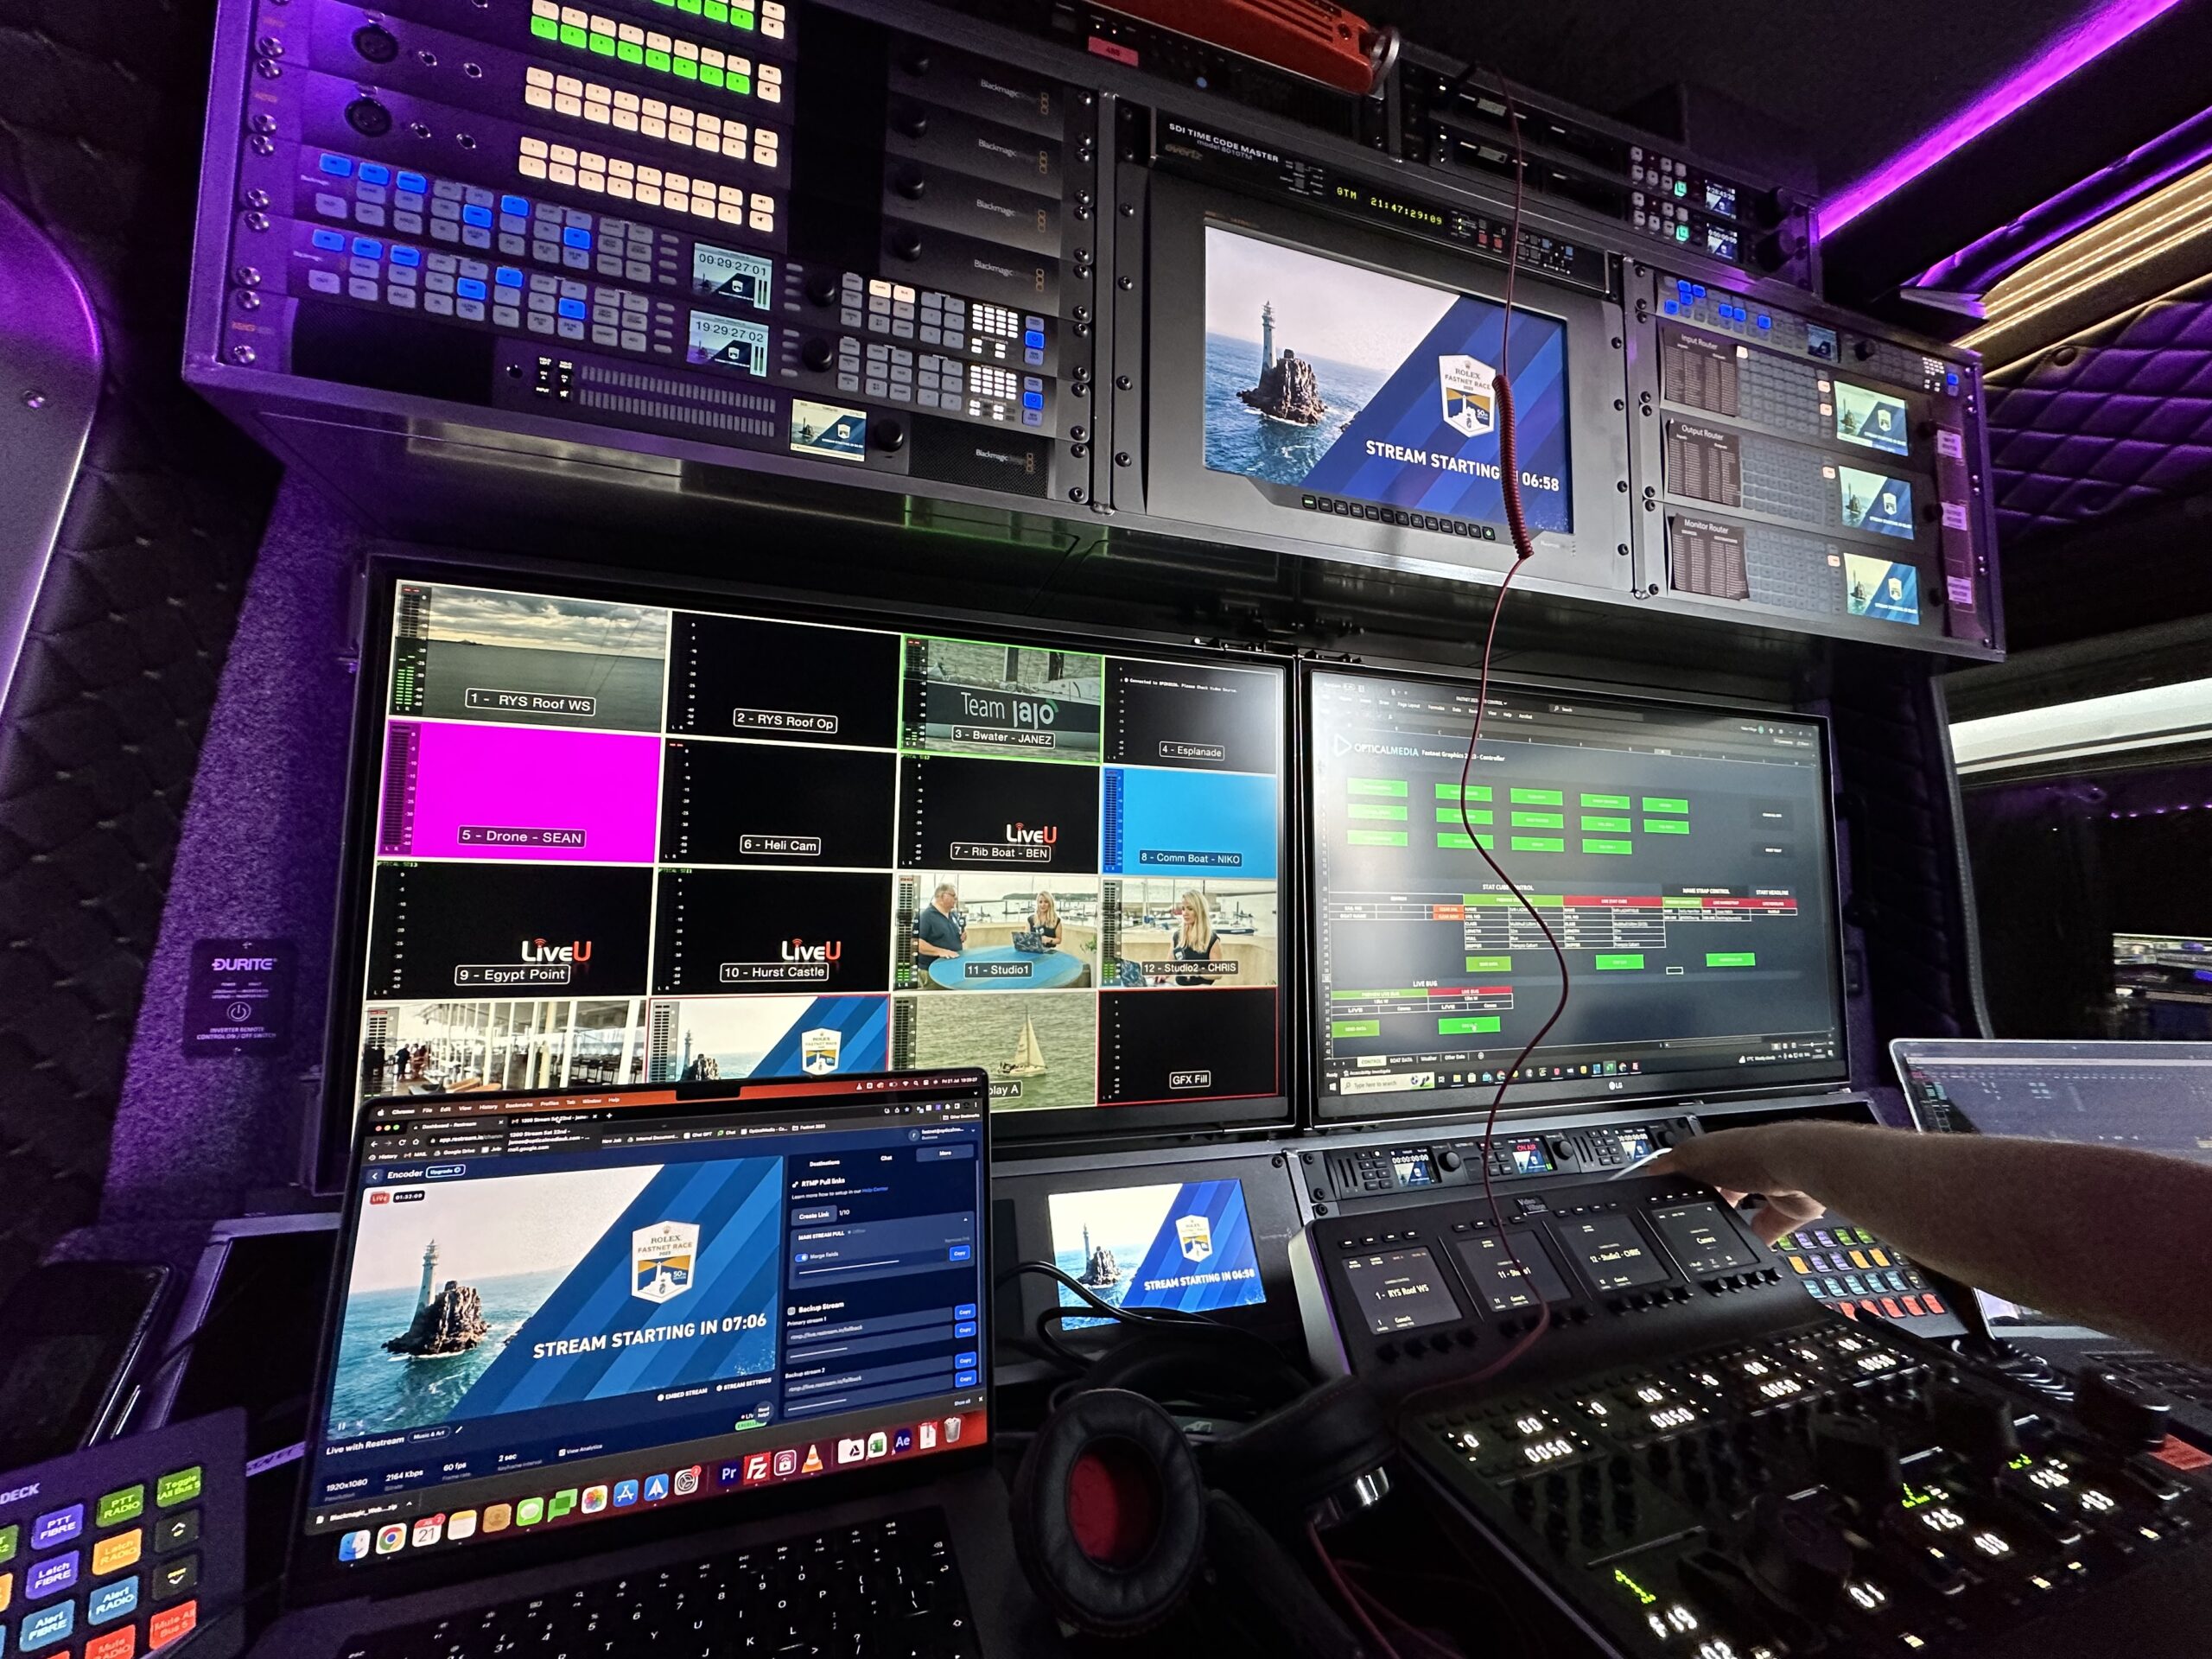 Optical Media Deploys LiveU’s On-Site Production Solution to Provide Expanded Coverage of the FastNet Yacht Race